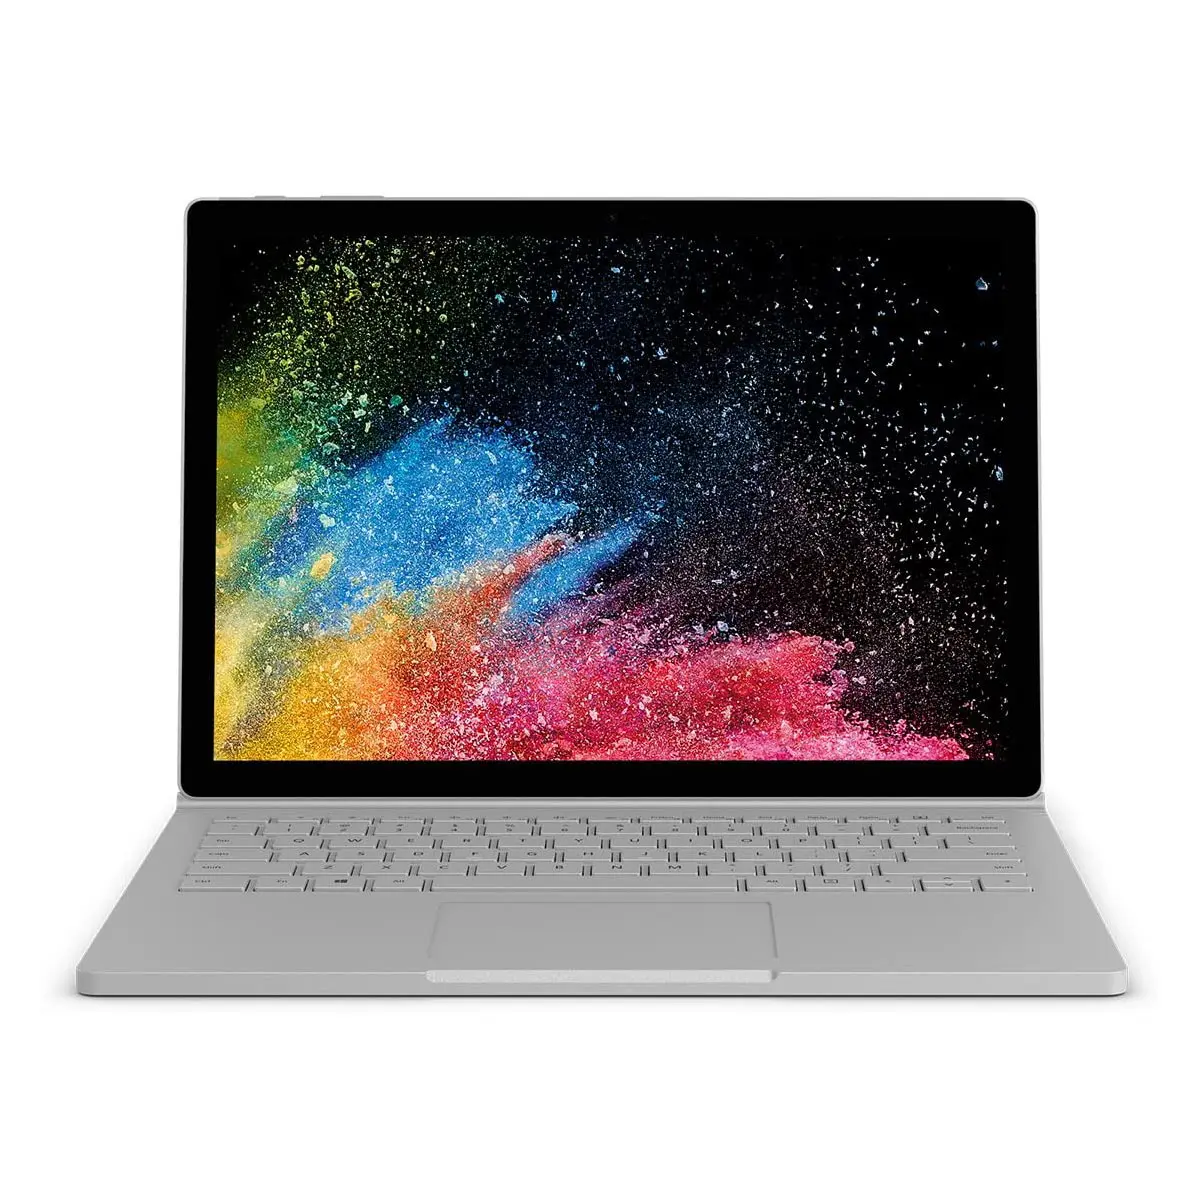 MICROSOFT Surface Book 2 – 13.5″ Pouces, Intel Core i5 – Occasion